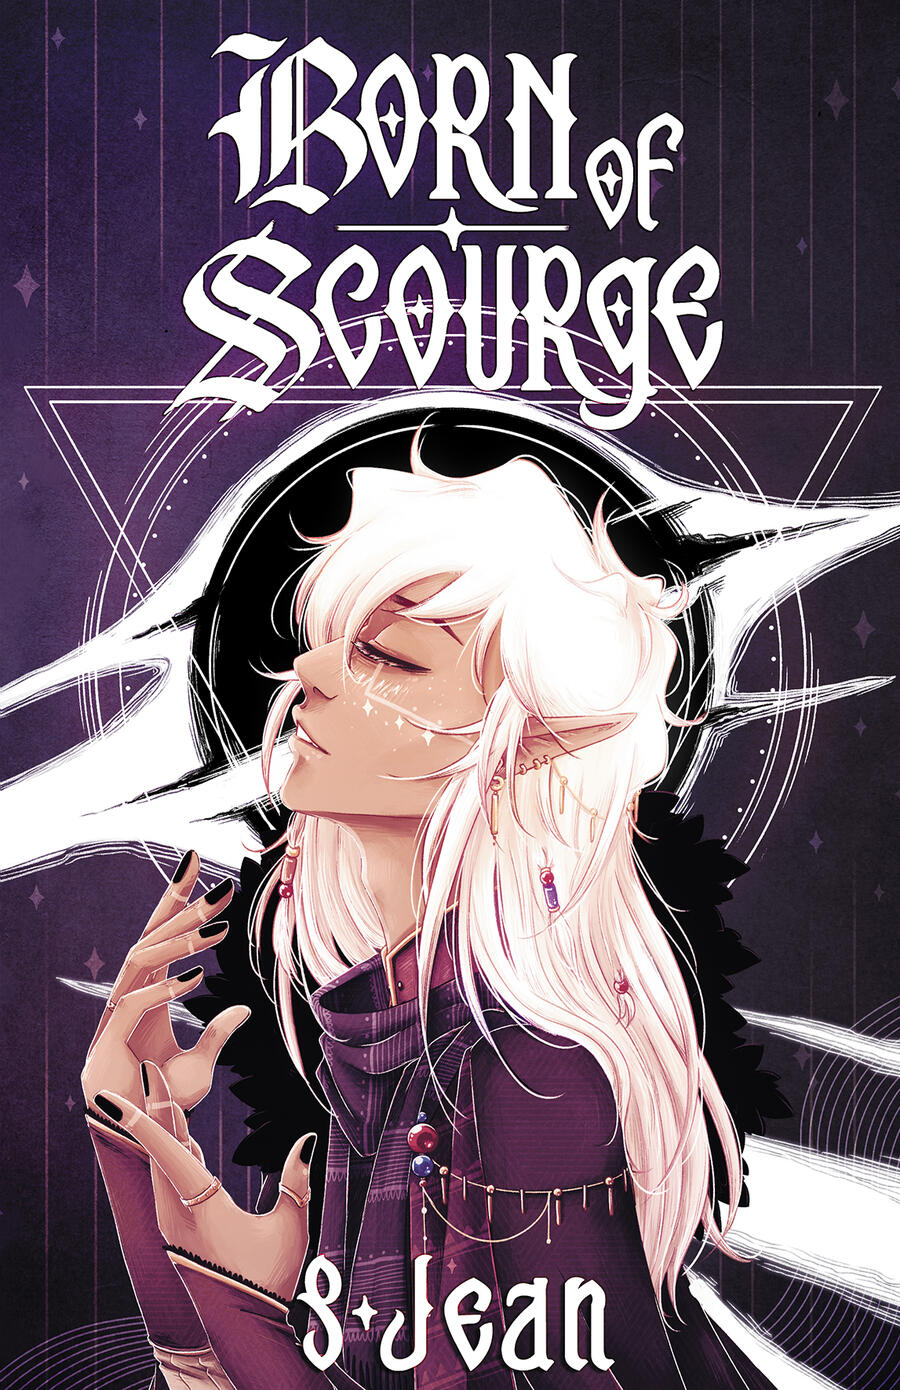 Born of Scourge's cover.